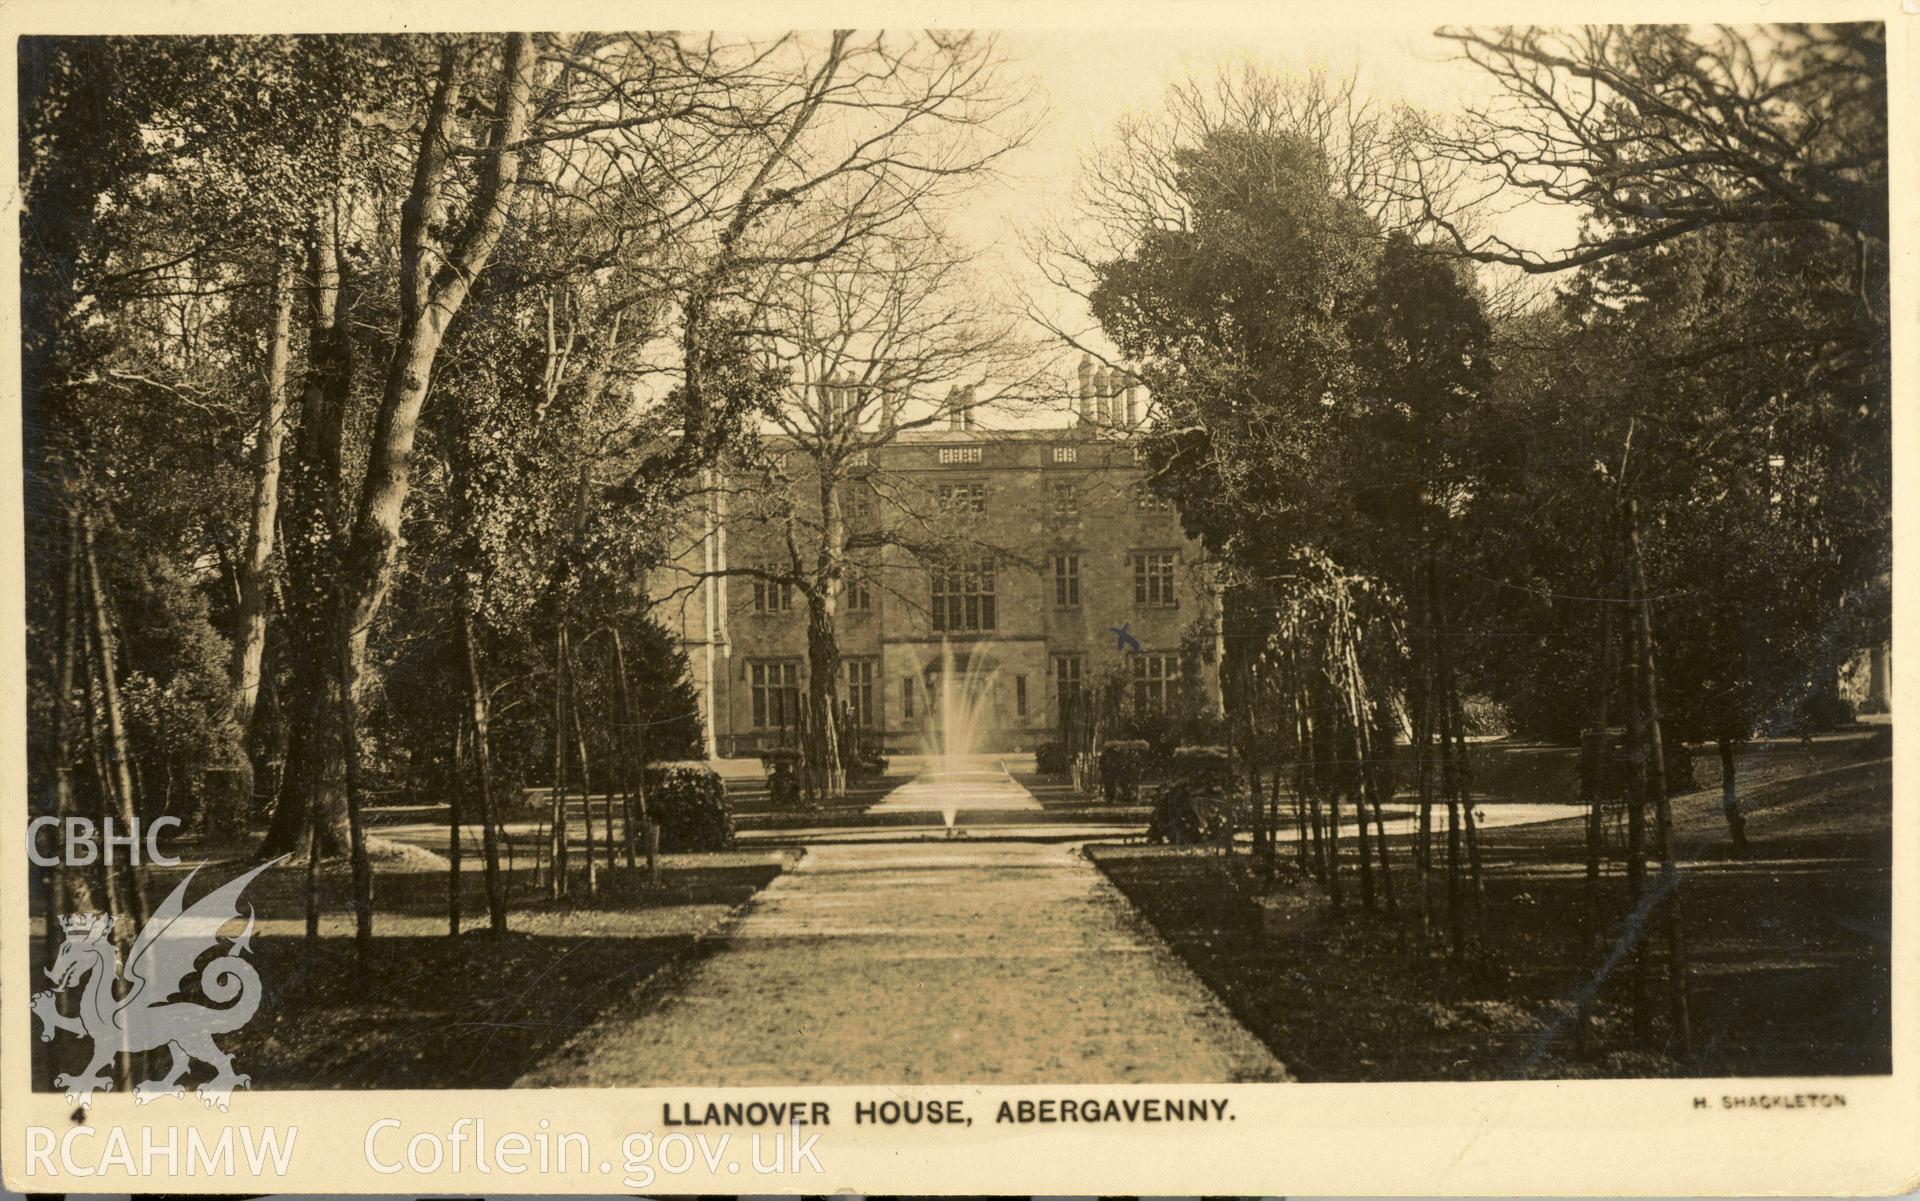 Digitised postcard image of Llanover House, Llanover, with fountain, H Shackleton. Produced by Parks and Gardens Data Services, from an original item in the Peter Davis Collection at Parks and Gardens UK. We hold only web-resolution images of this collection, suitable for viewing on screen and for research purposes only. We do not hold the original images, or publication quality scans.